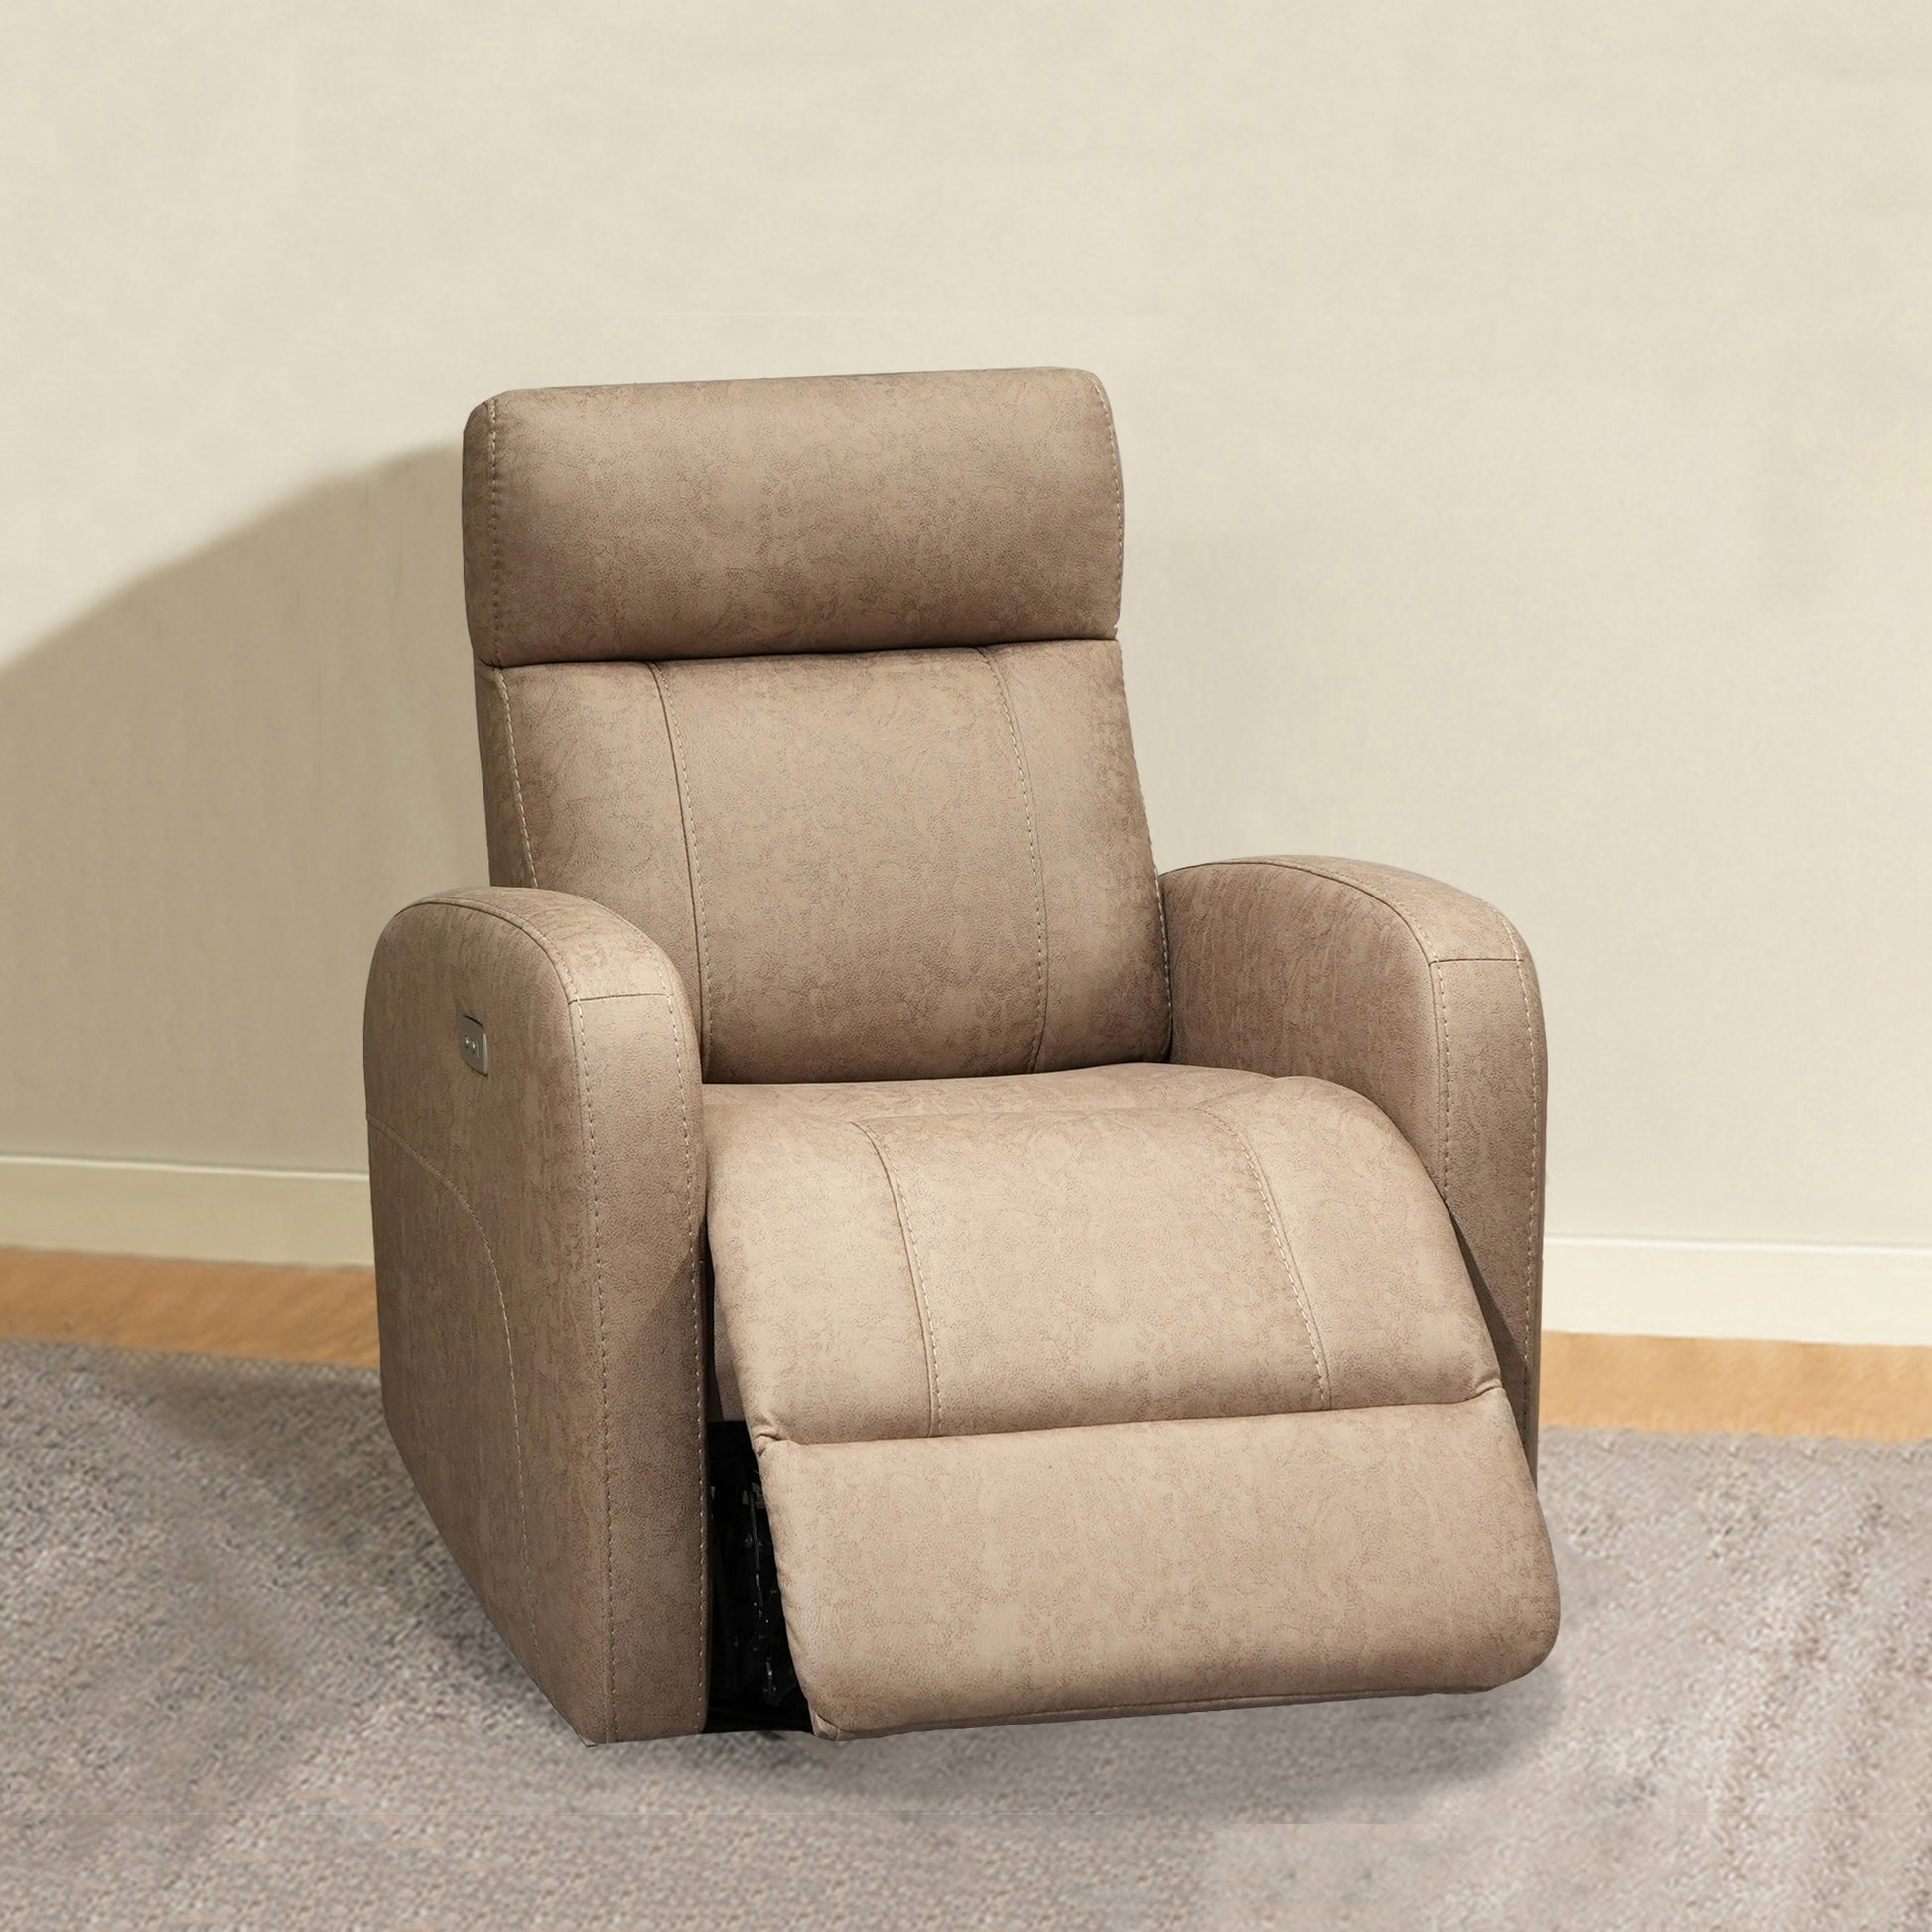 camel colored recliners